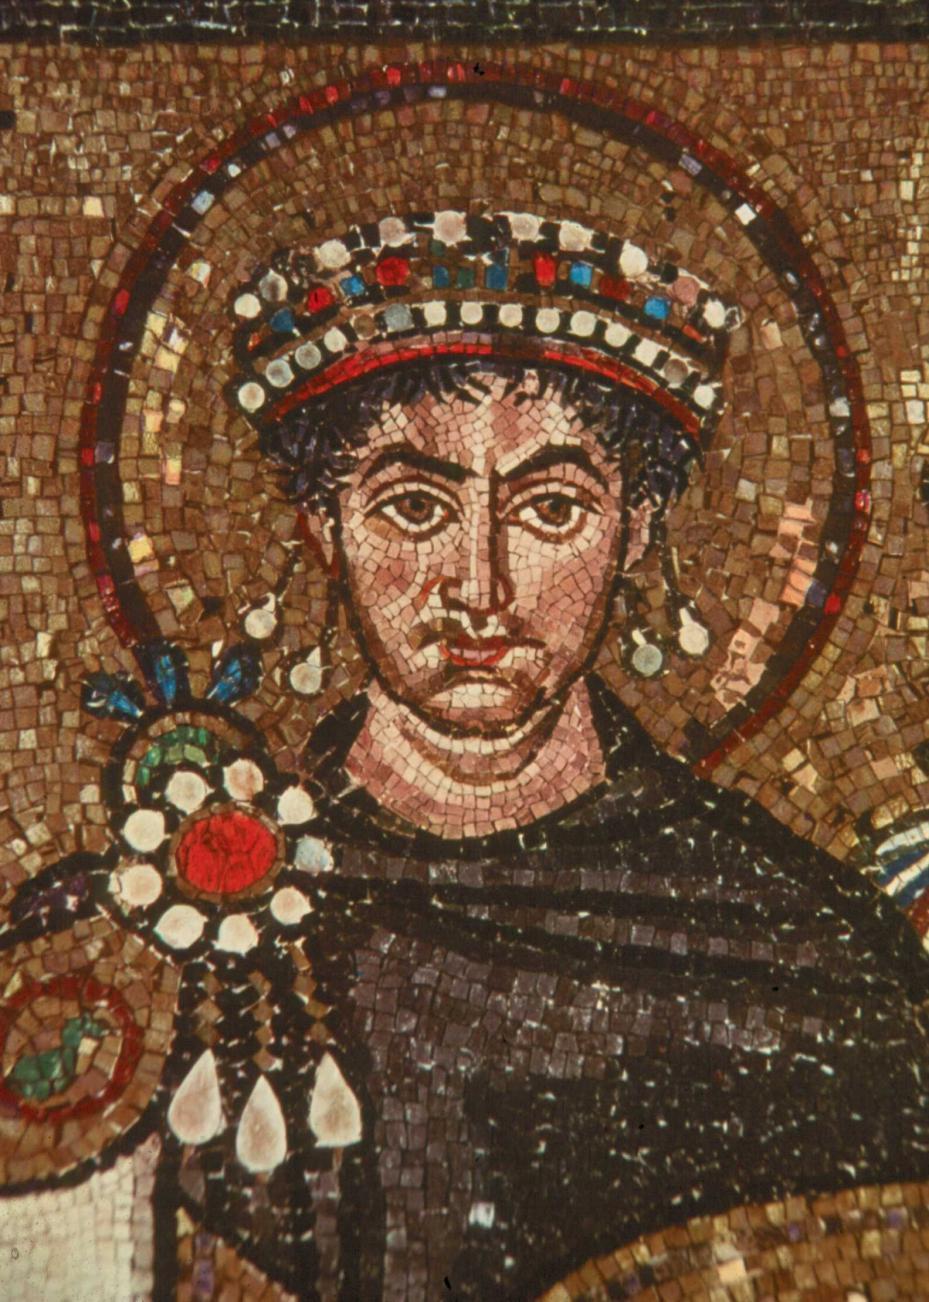 In Byzantium the emperor was the head of the Empire as well as head of the church